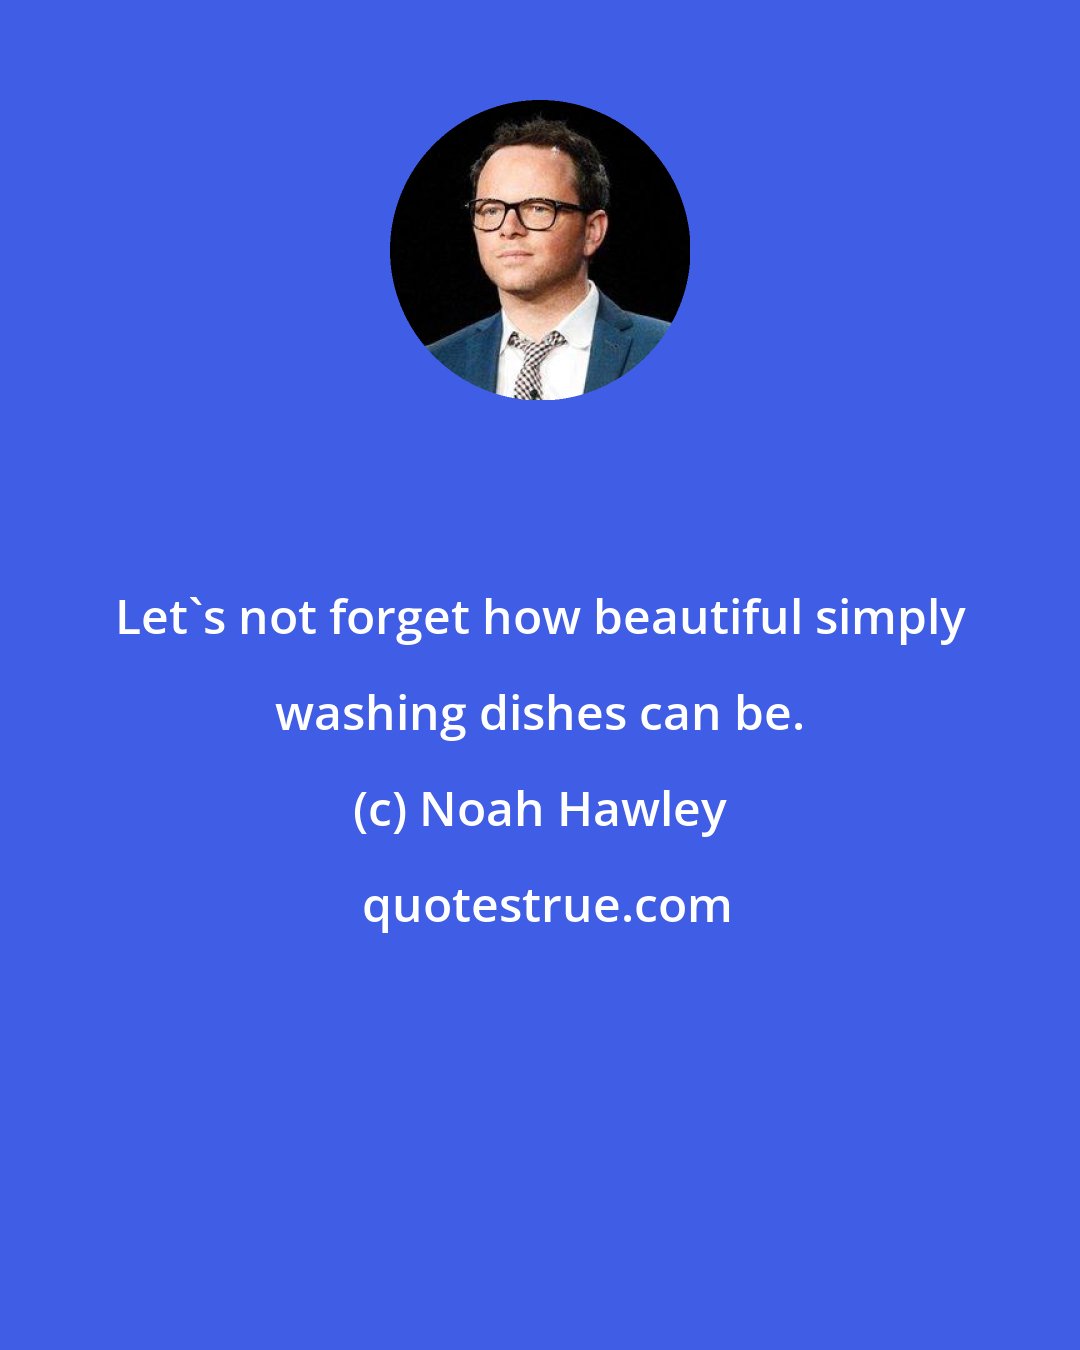 Noah Hawley: Let's not forget how beautiful simply washing dishes can be.